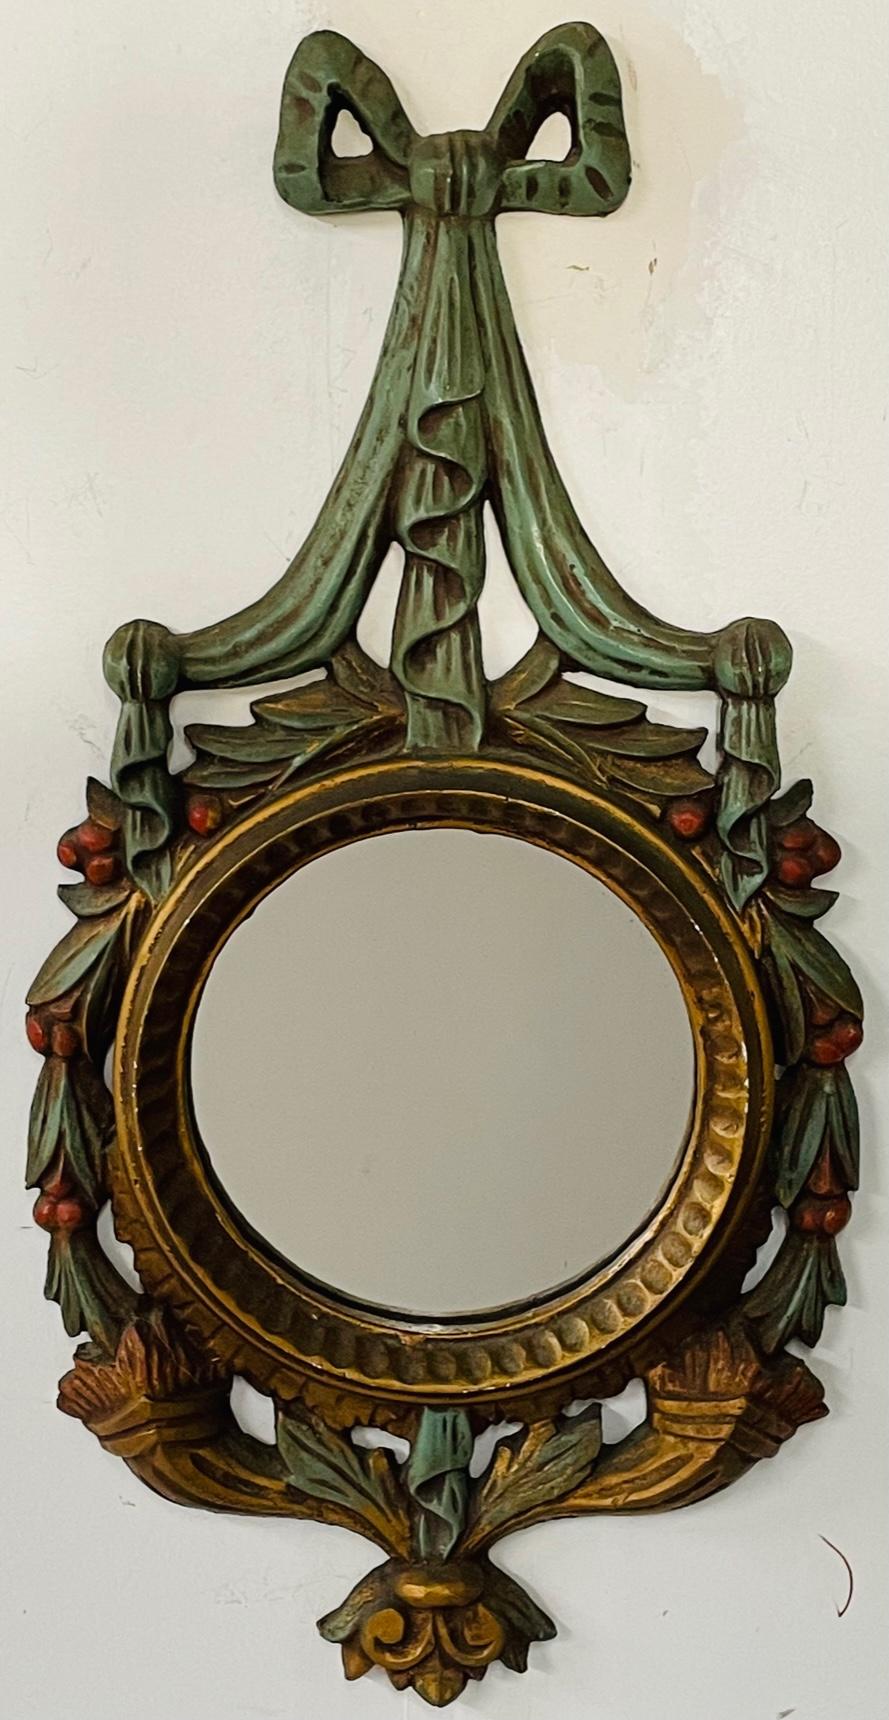 An exquisite French Baroque style bullseye wall mirror. The circular shape antique mirror is finely wood carved and hand painted in Green and gilt tone. The mirror features a large bow / ribbon crowning the mirror and decorated with leaves motif